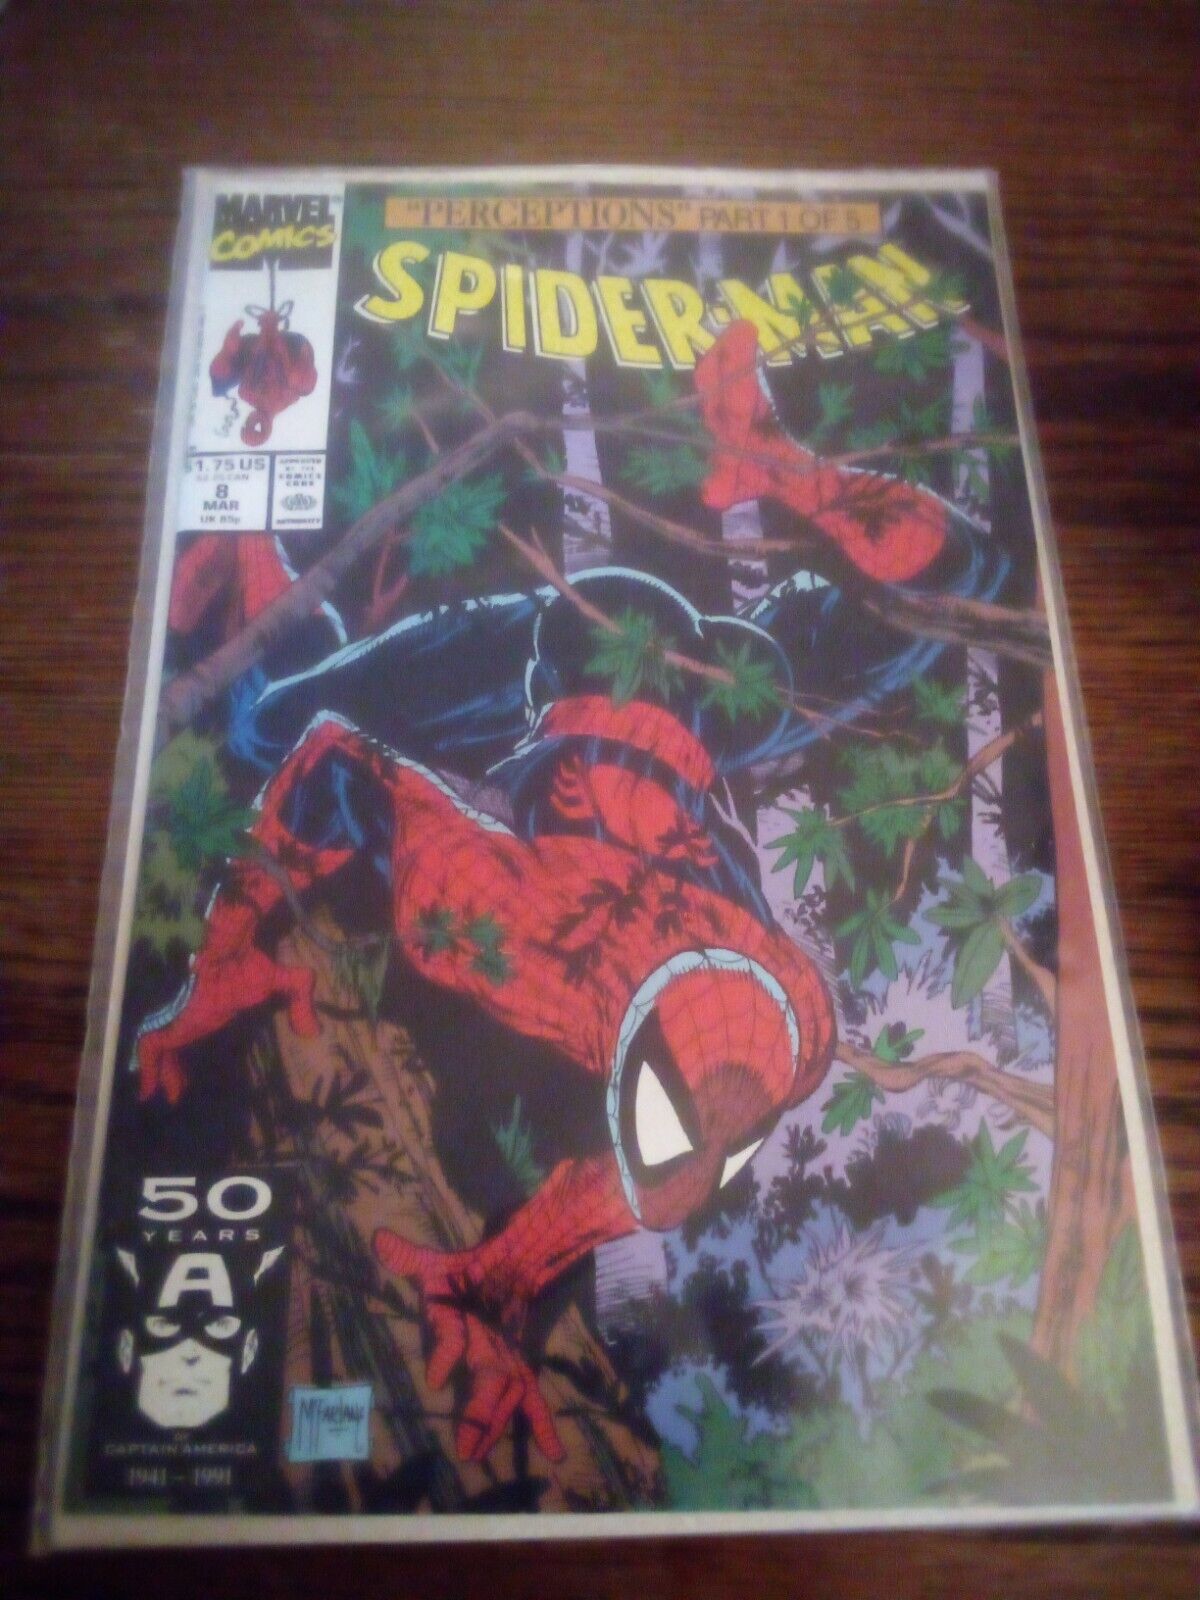 UNOPENED flawless Perceptions Part 1 of 5 Spider-Man Comic (1991) marvel